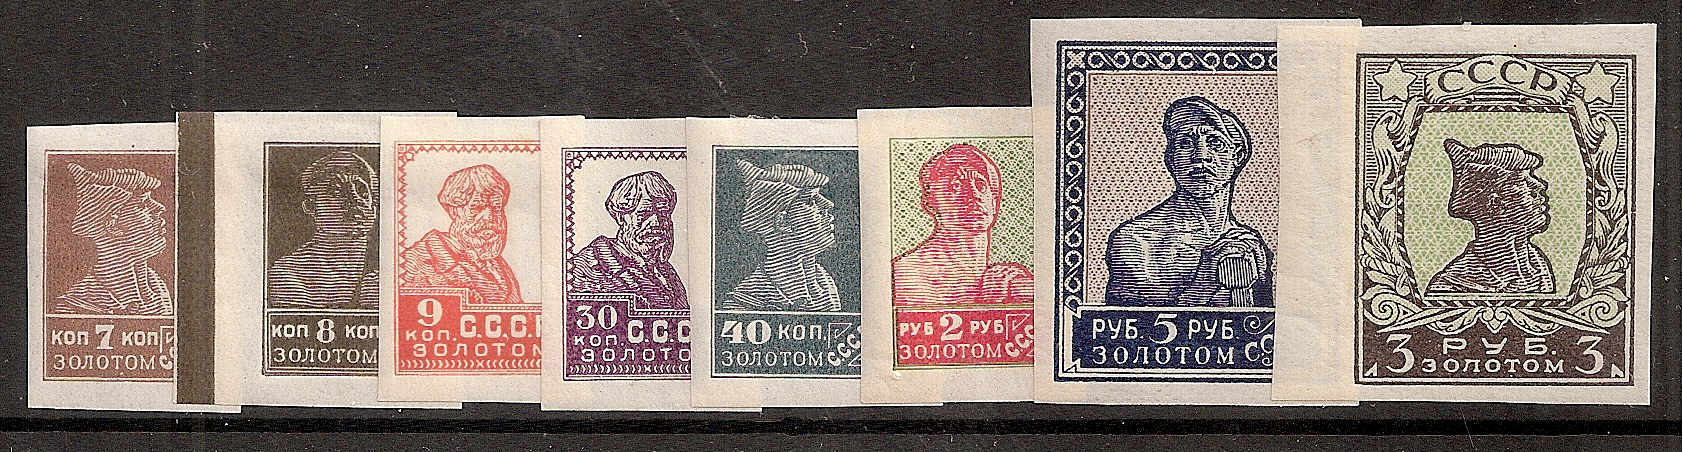 Russia Specialized - Soviet Republic Footnote after #275A Scott 275Ad 